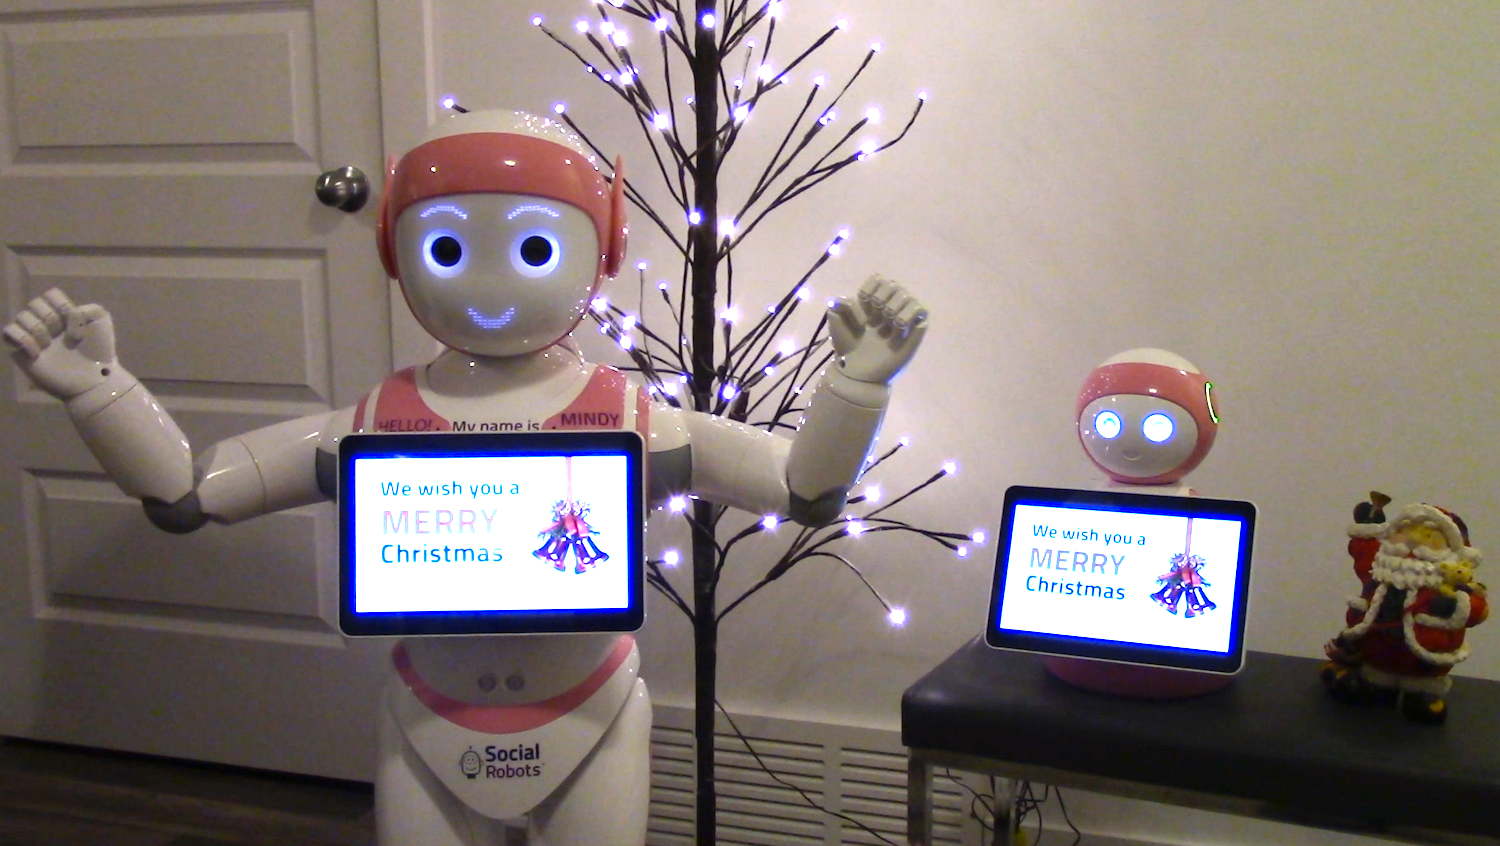 Mindy with arms raised, Merry Christmas song on tablet, mini Mindy to the right side with mini Santa statue